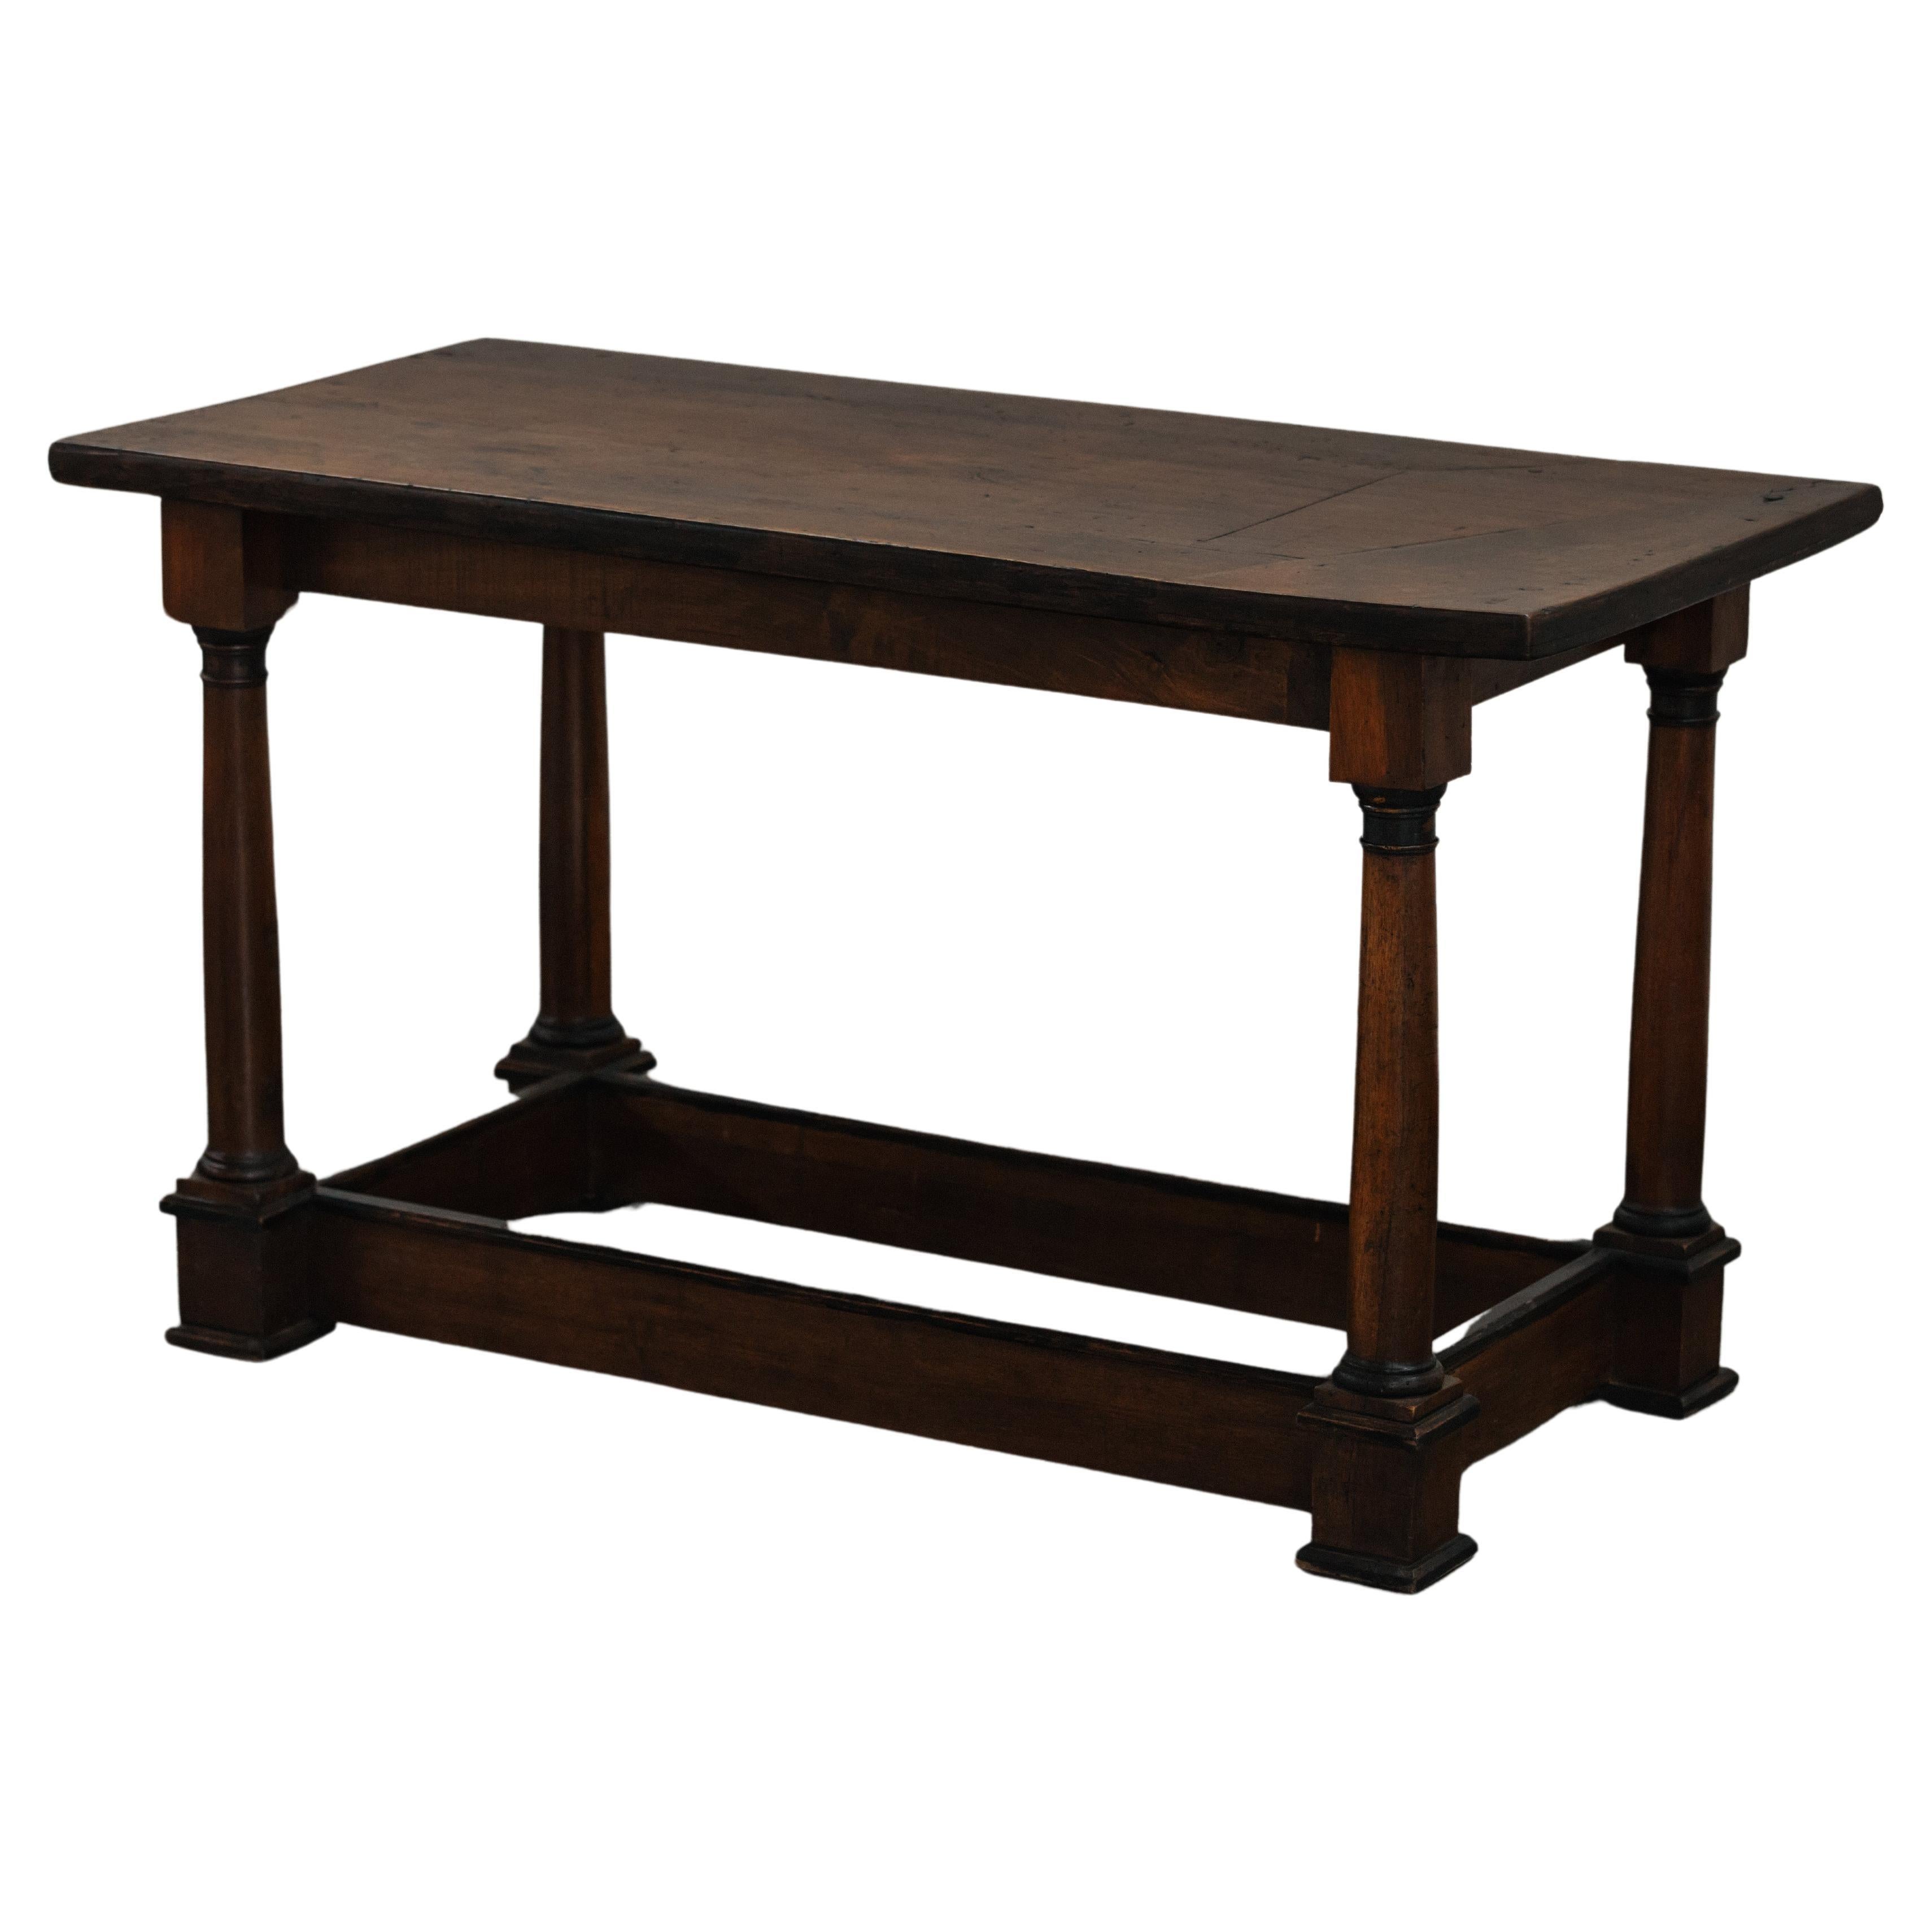 Early Empire Pine Console From Italy, Circa 1850